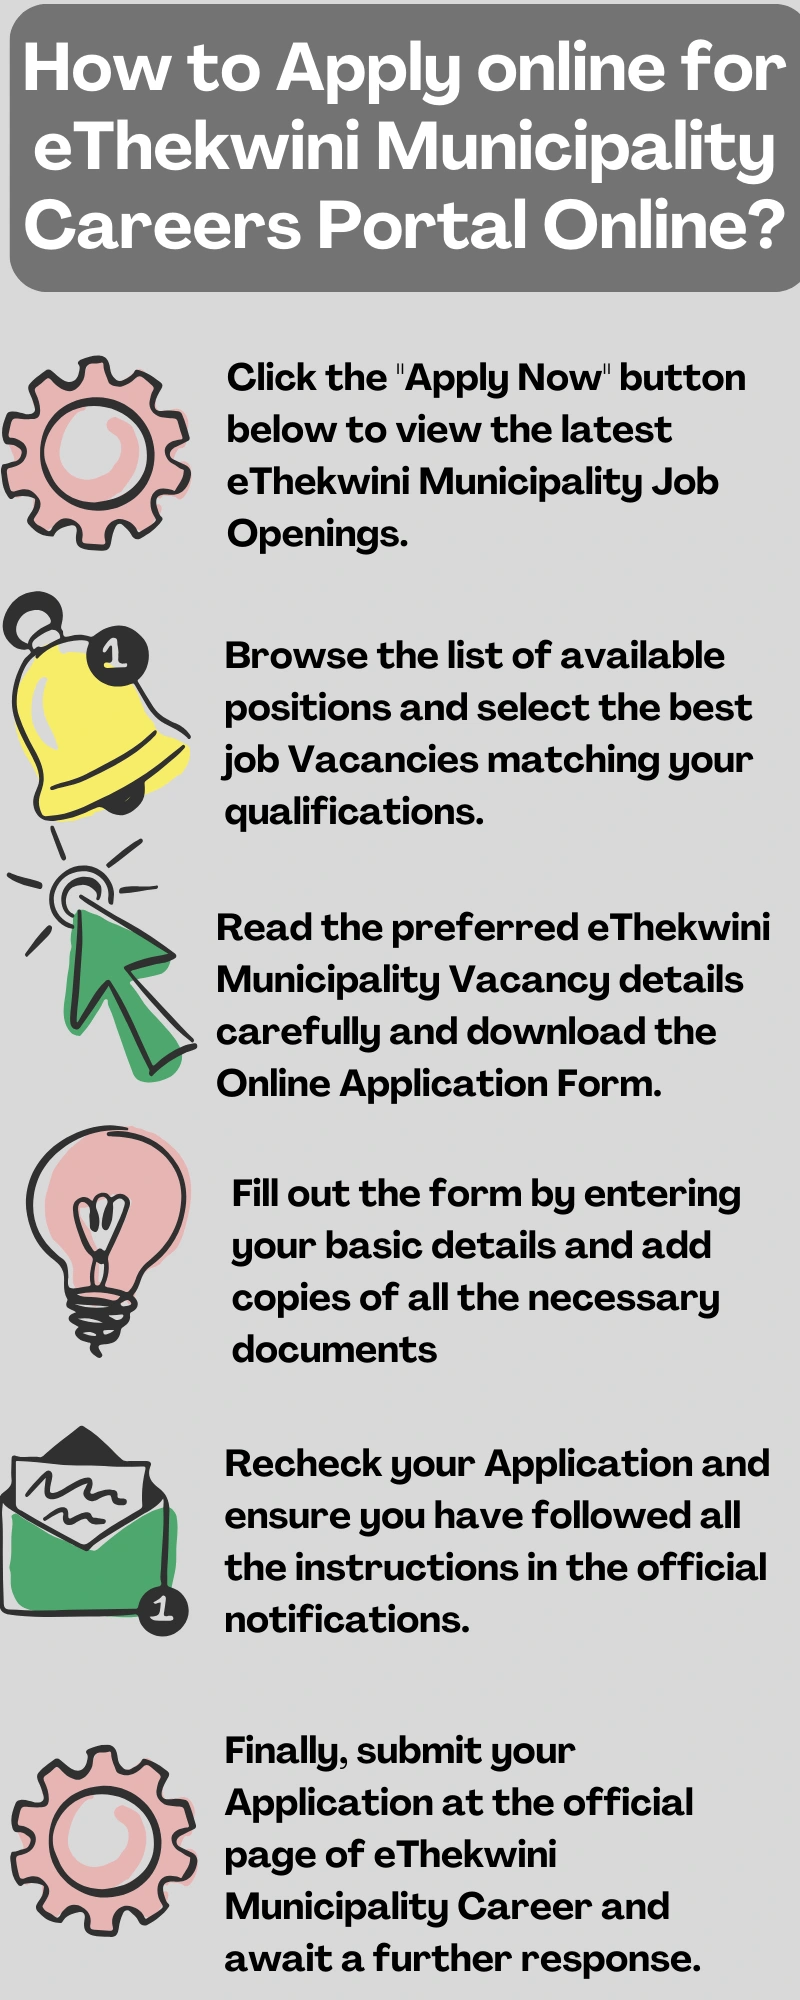 How to Apply online for eThekwini Municipality Careers Portal Online?